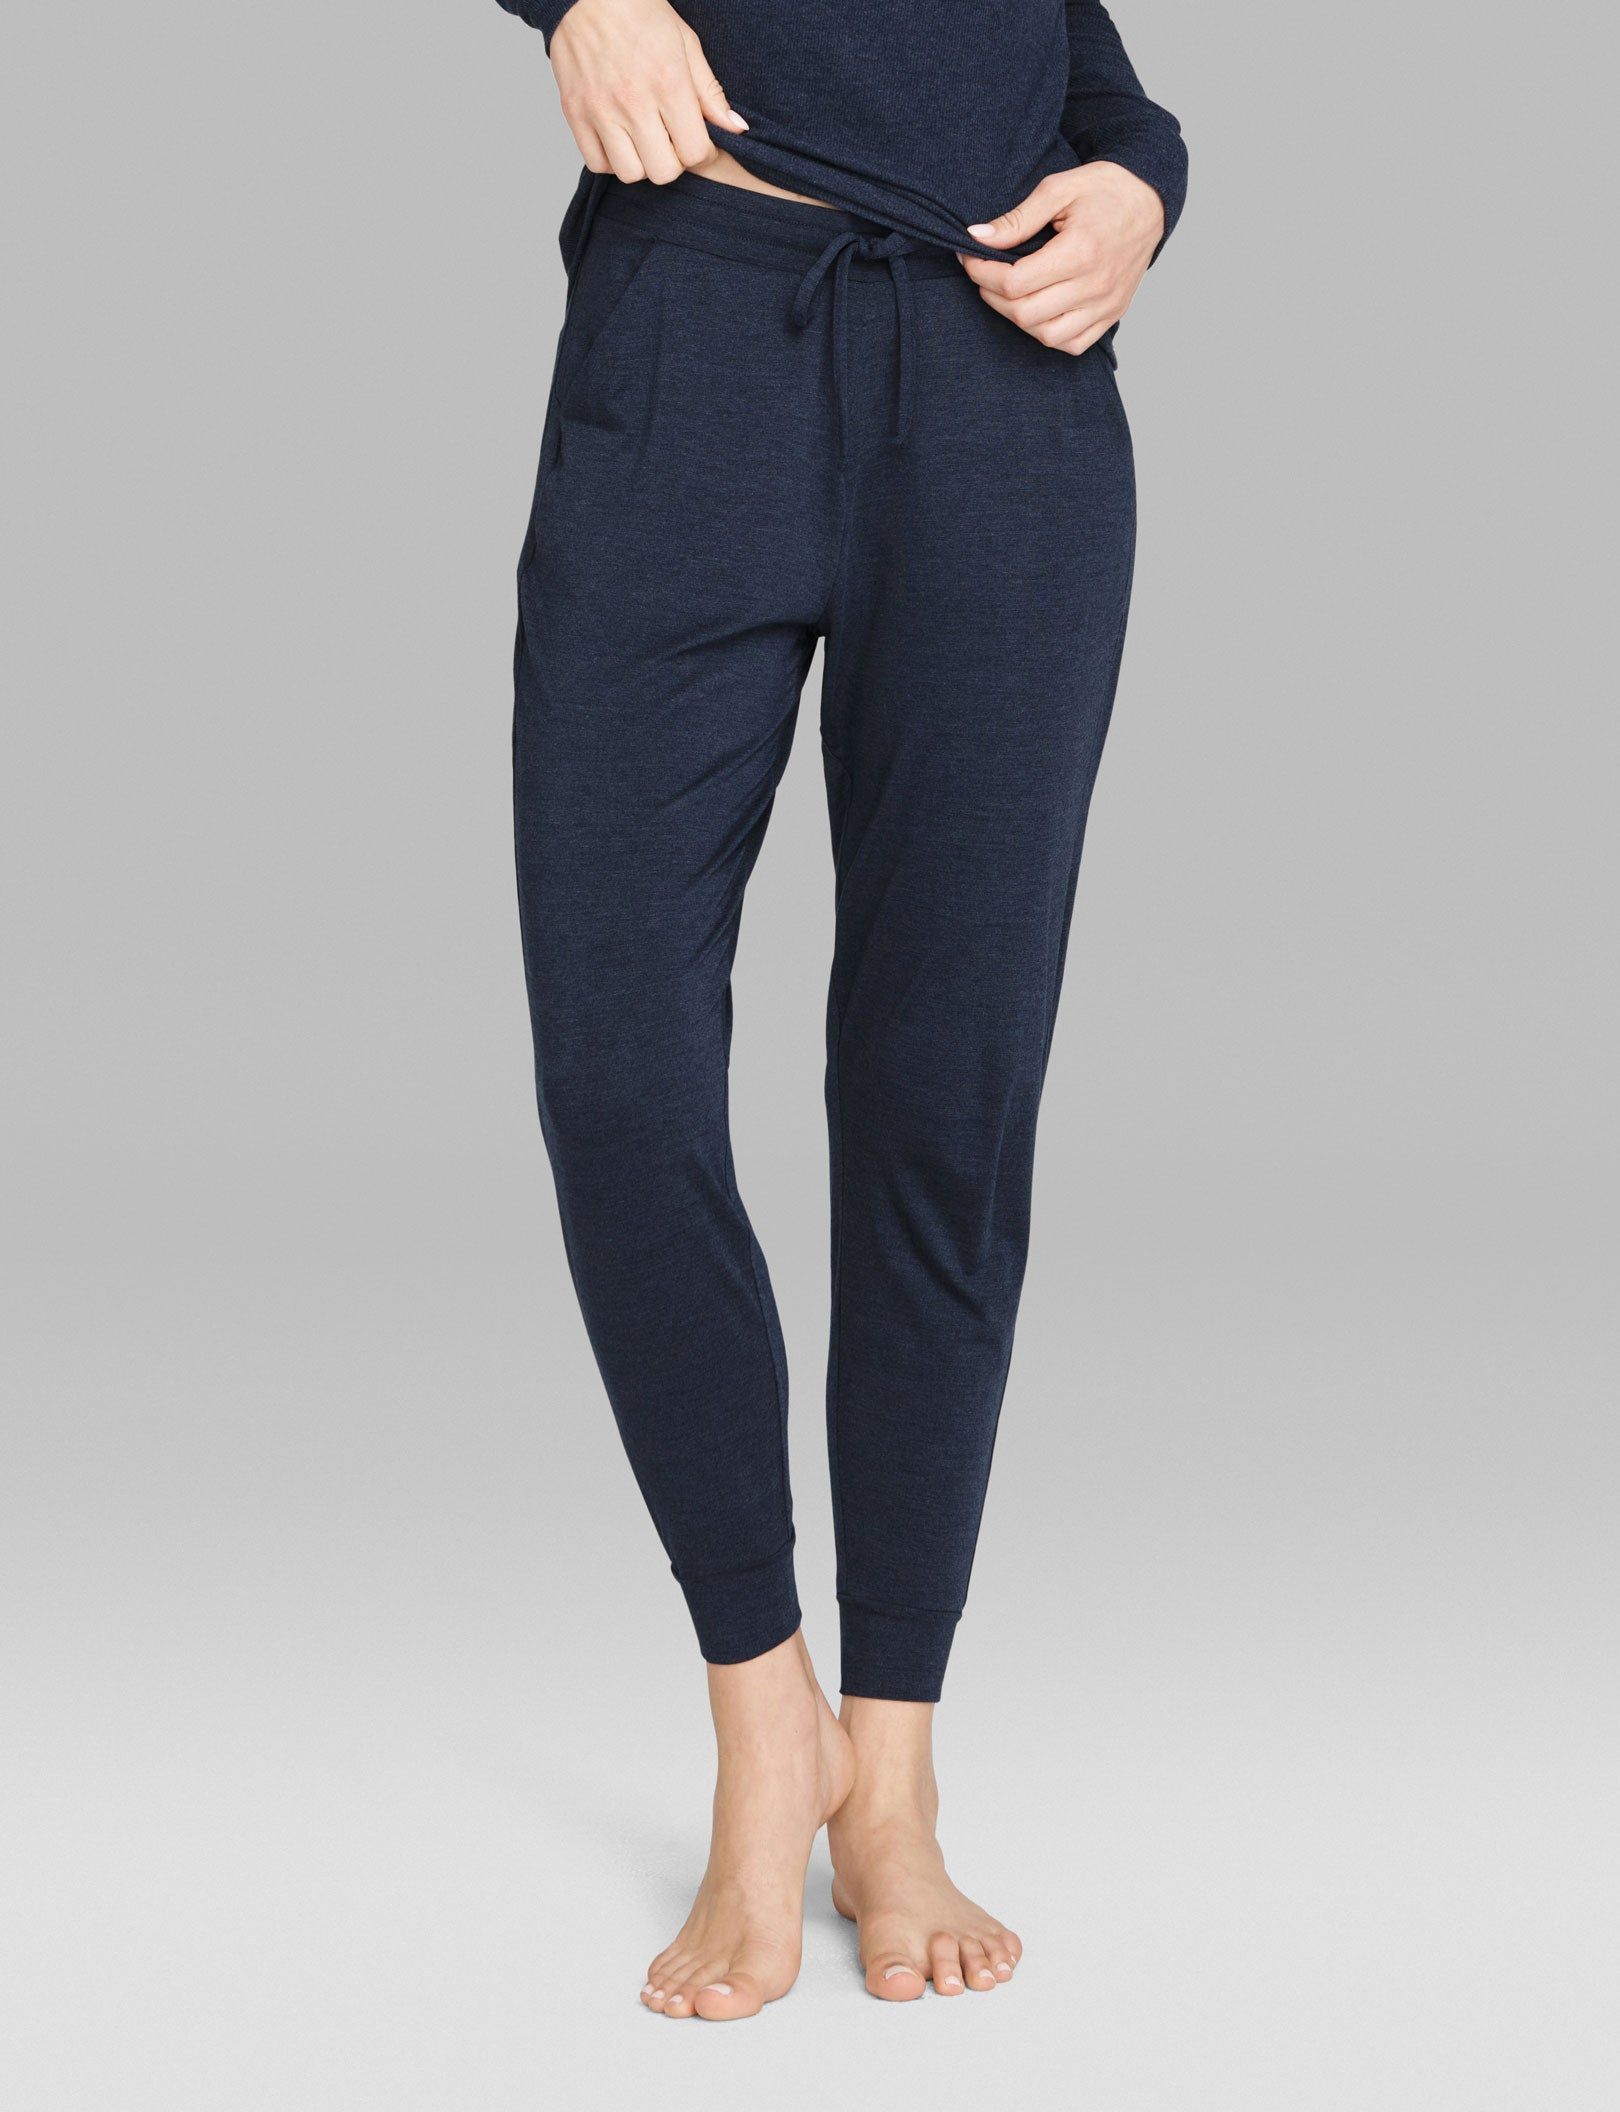 Women's Downtime Jogger | Tommy John